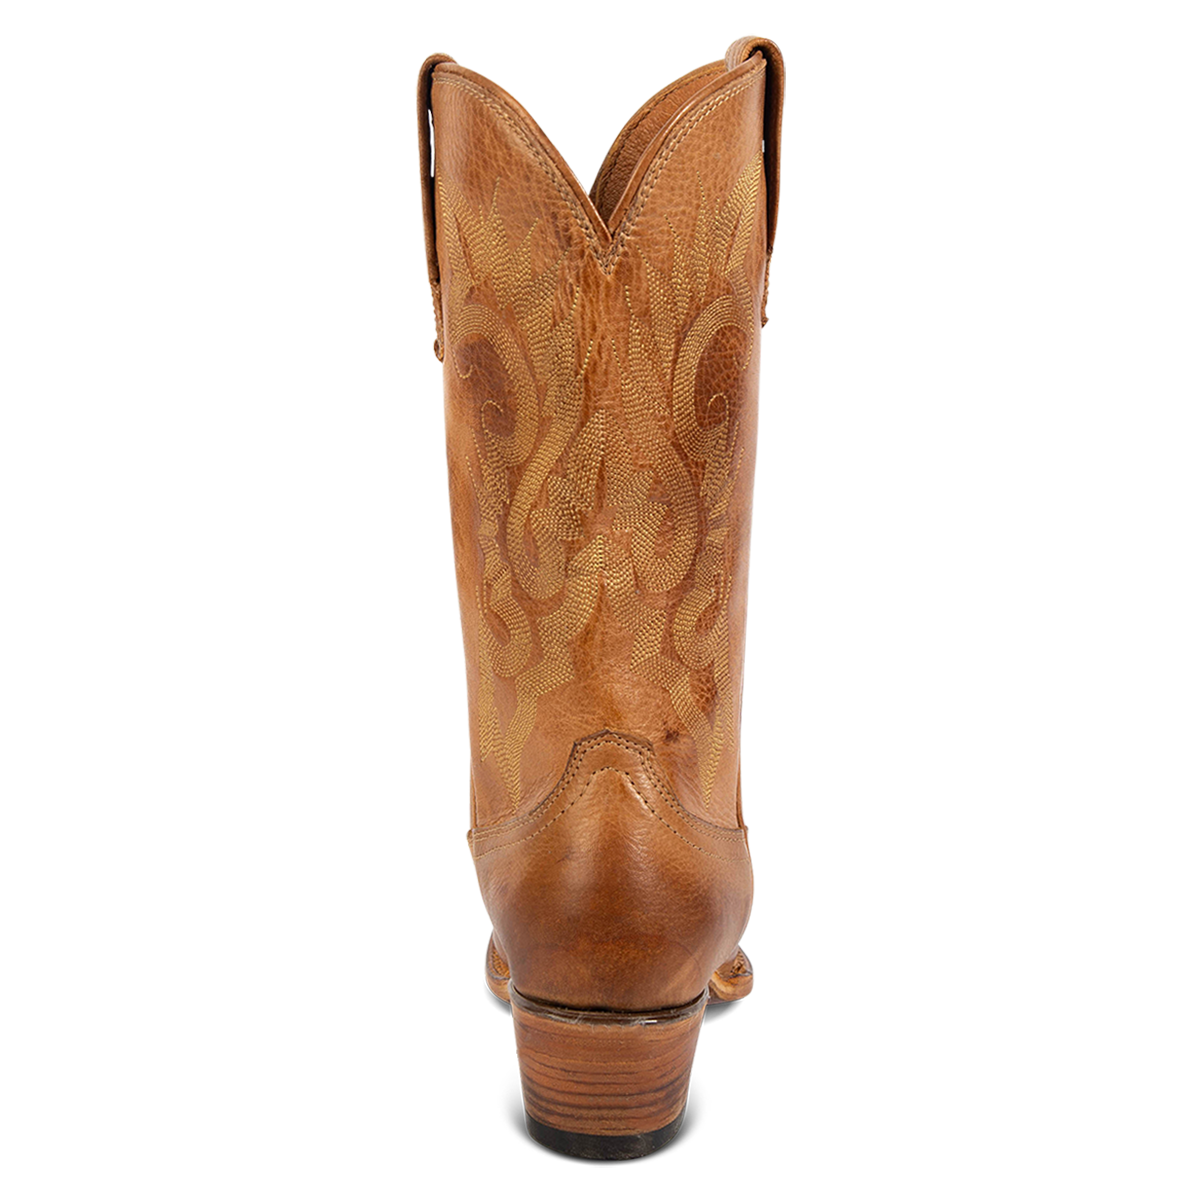 Back view showing FREEBIRD women's Woody wheat leather boot with stitch detailing and low slanted heel